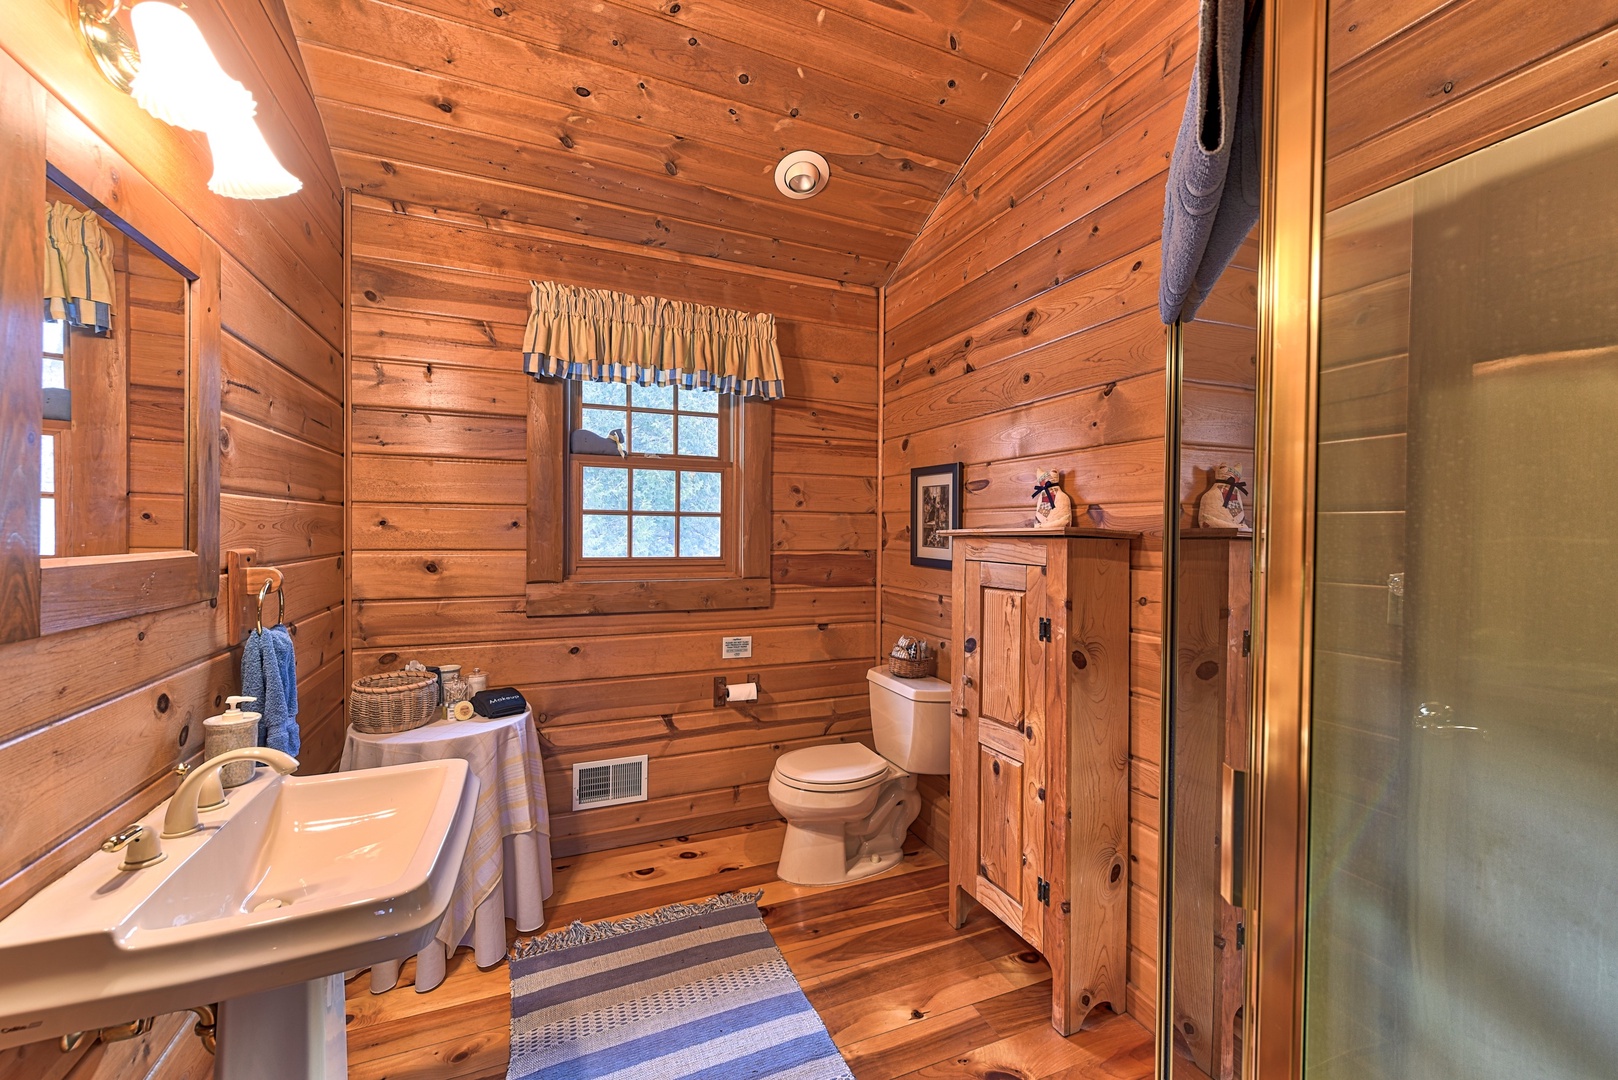 Immerse yourself in the cozy charm of this bathroom.